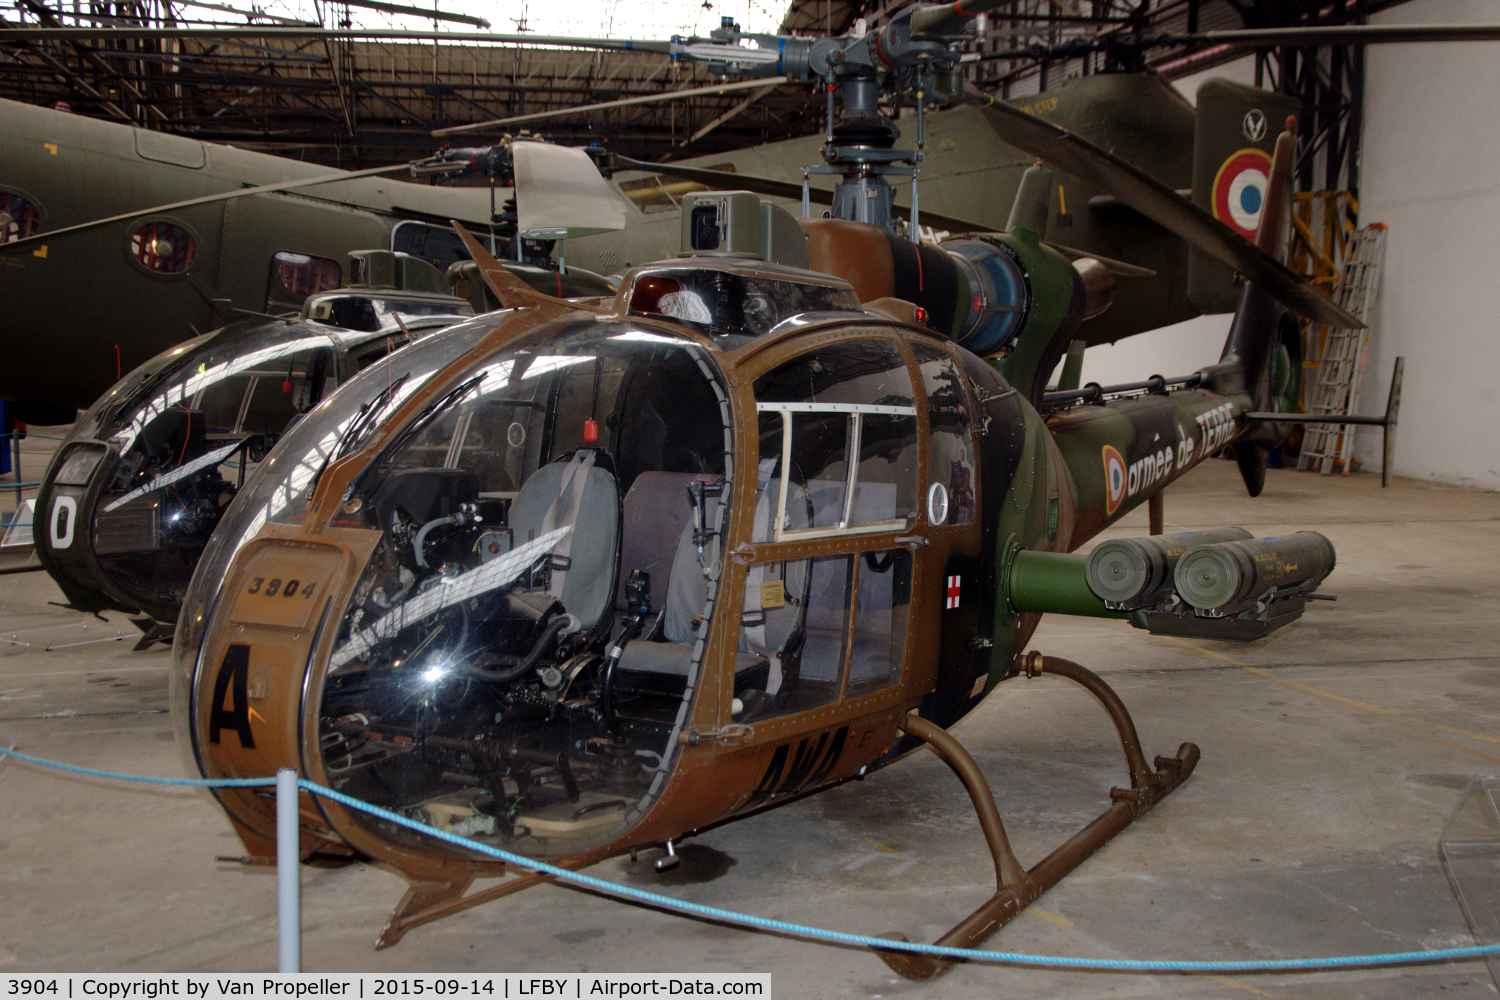 3904, Aérospatiale SA-342M Gazelle C/N 1904, Aerospatiale SA342M Gazelle helicopter of the French Army light aviation service in the ALAT museum at Dax, southern France